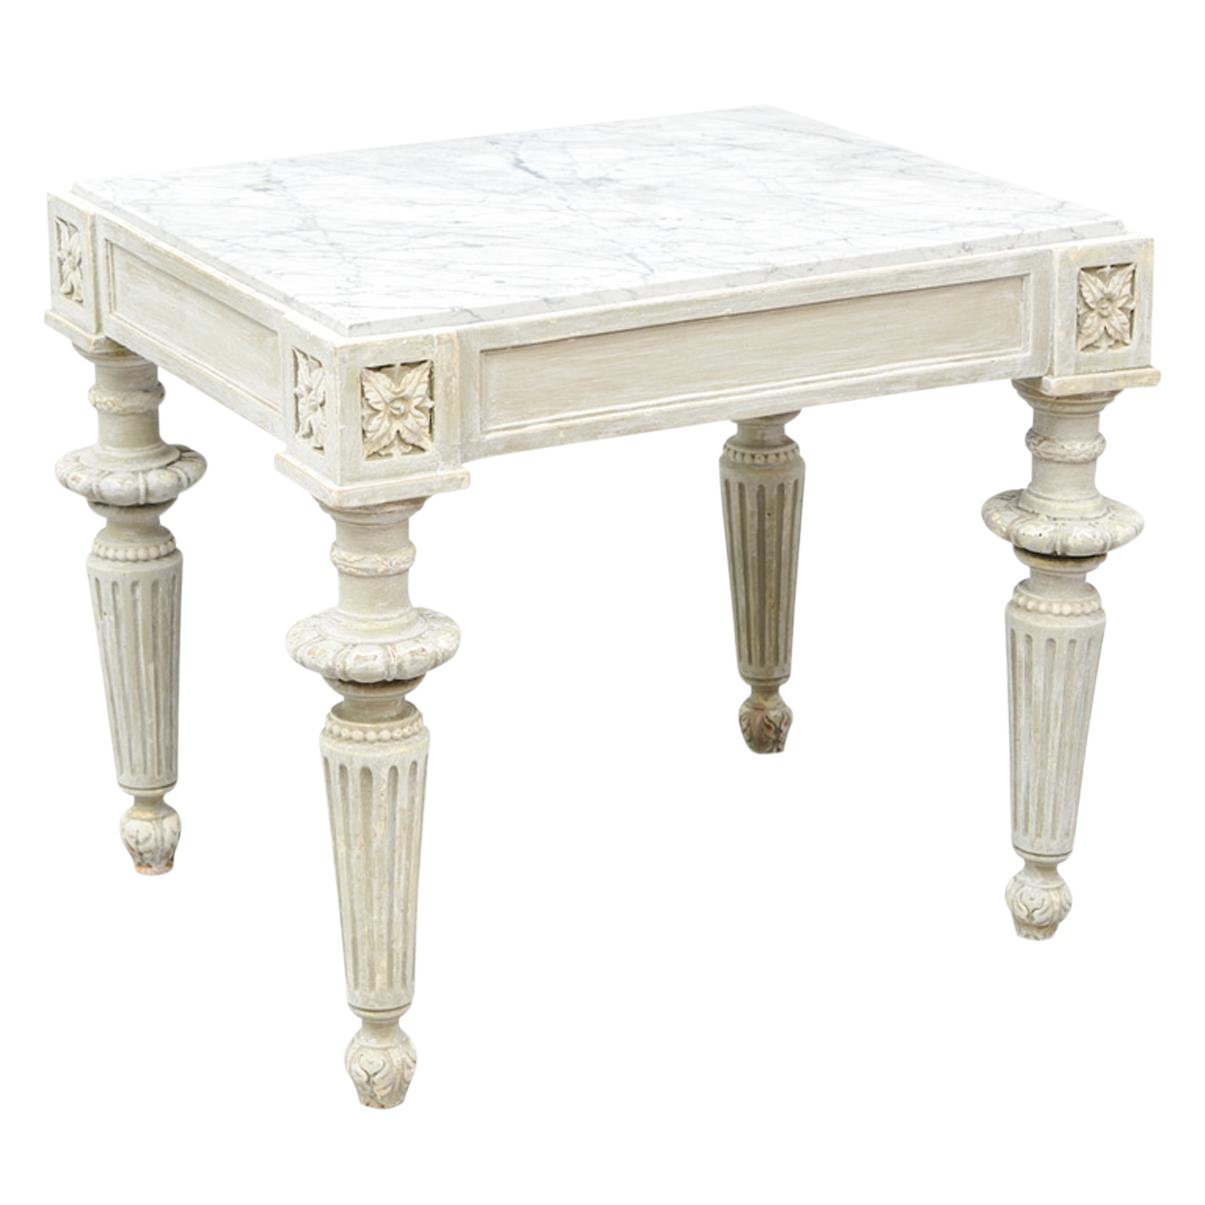 exceptional carved wood louis xvi style accent table with white marble top gold mats tall thin mirrored tray nautical pendant lamp coastal bathroom accessories sofa shelves and